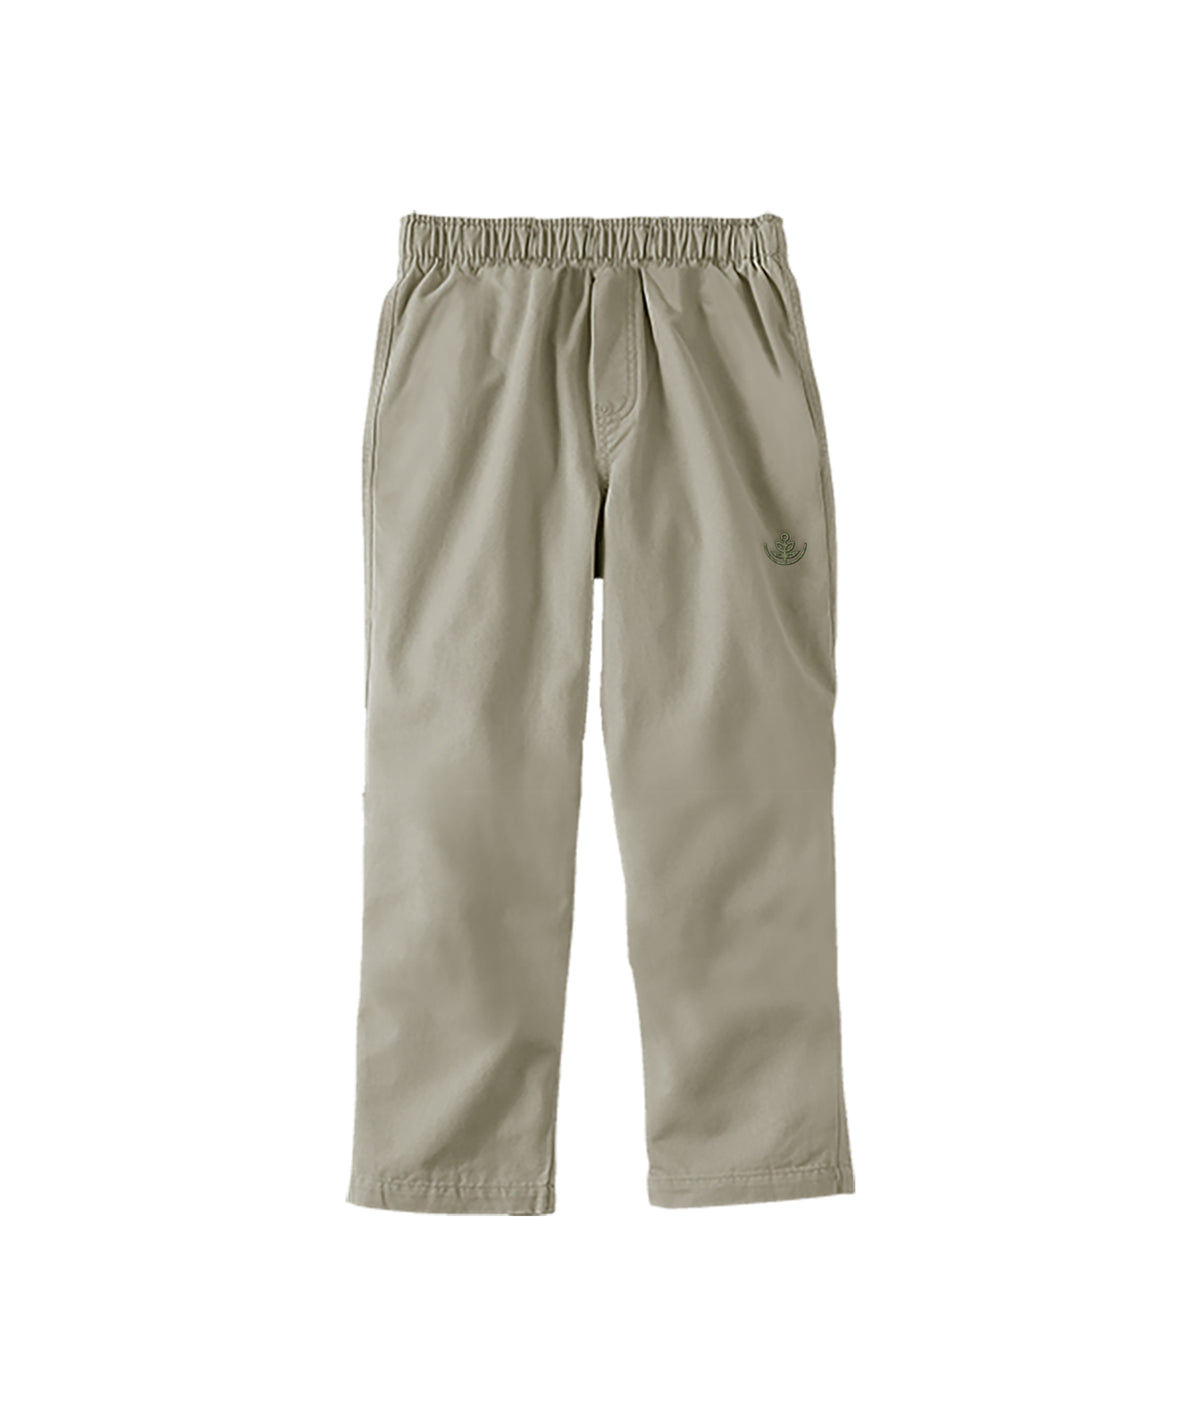 ROTHEWOOD RUGBY PANTS, CHILD